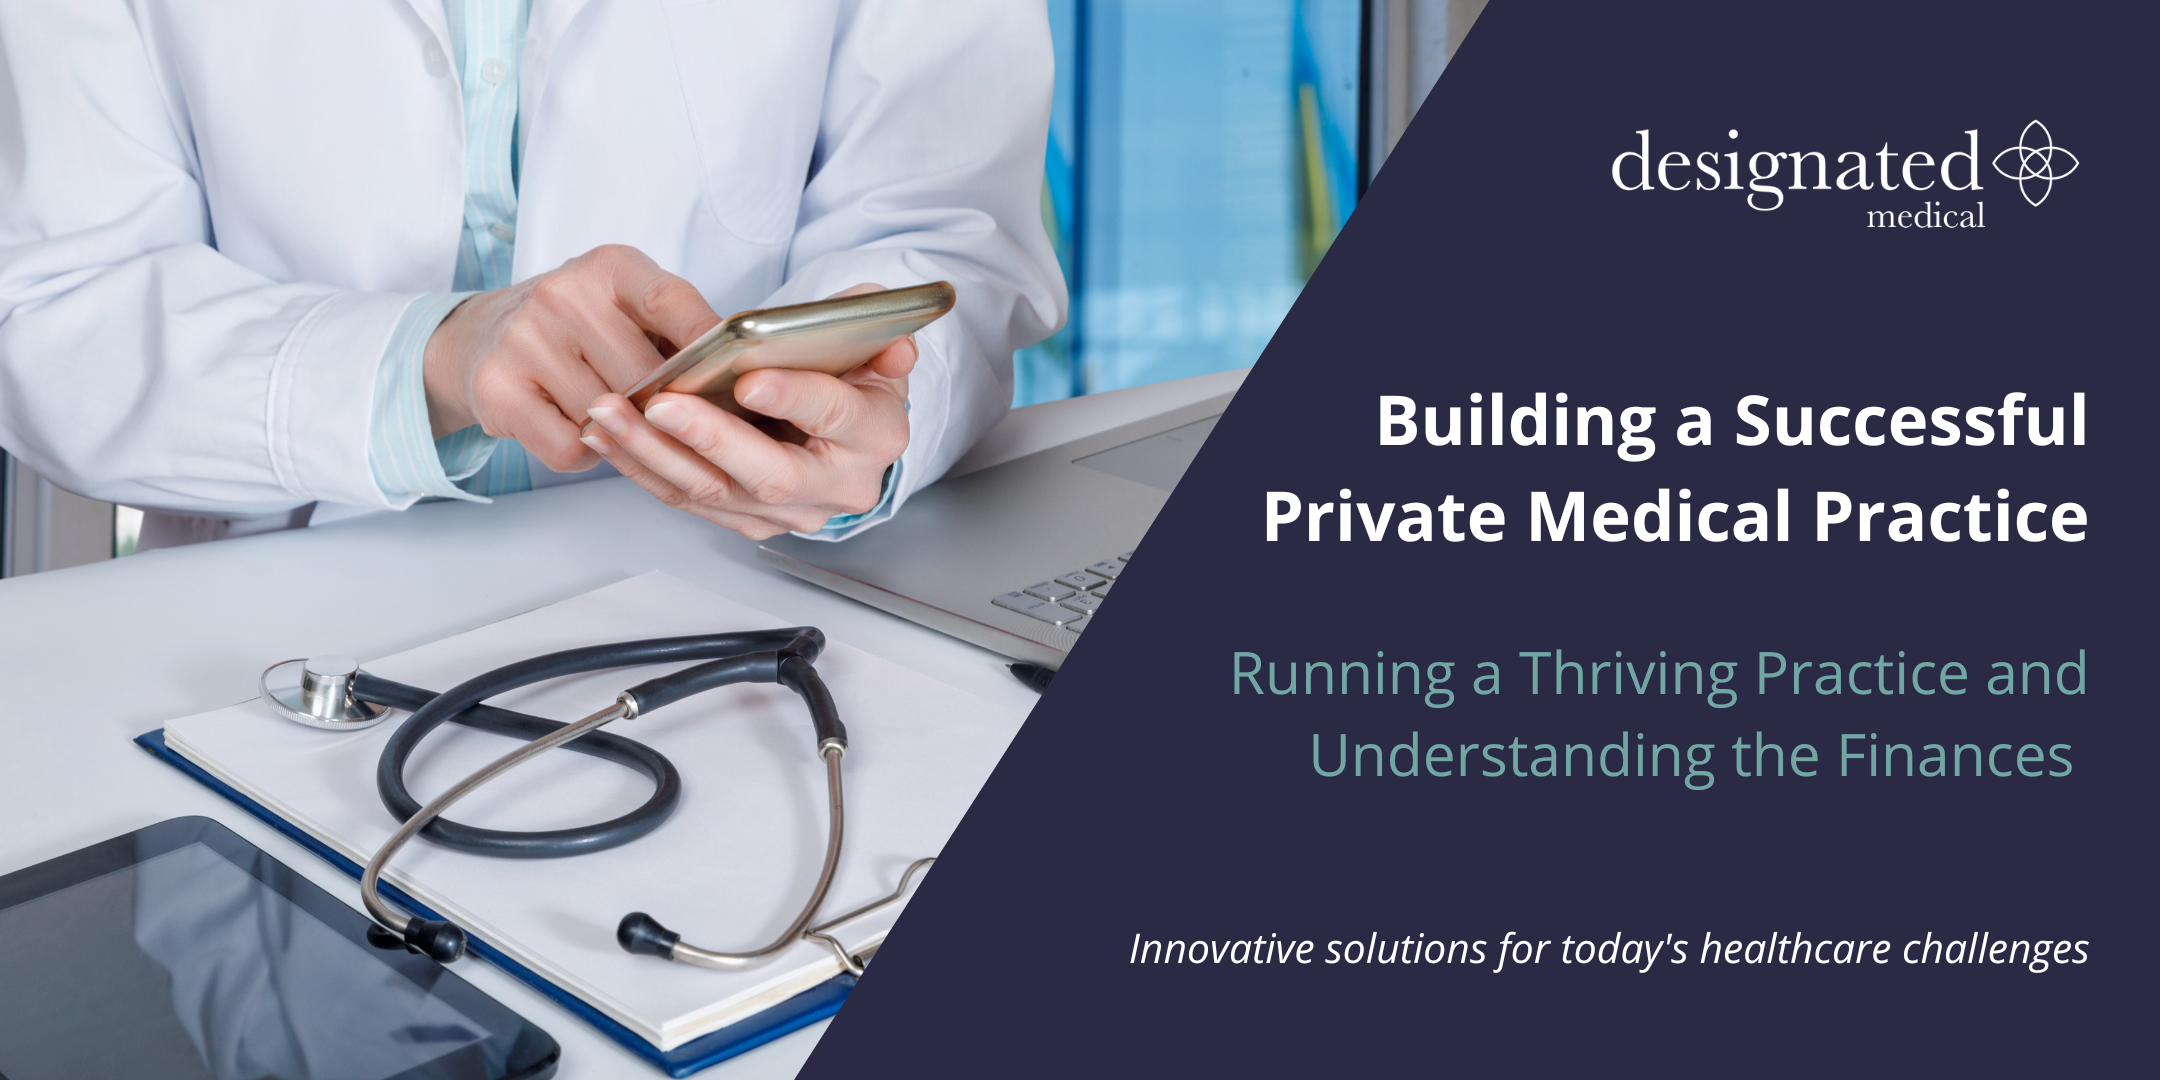 Running a Thriving Practice - Designated Medical